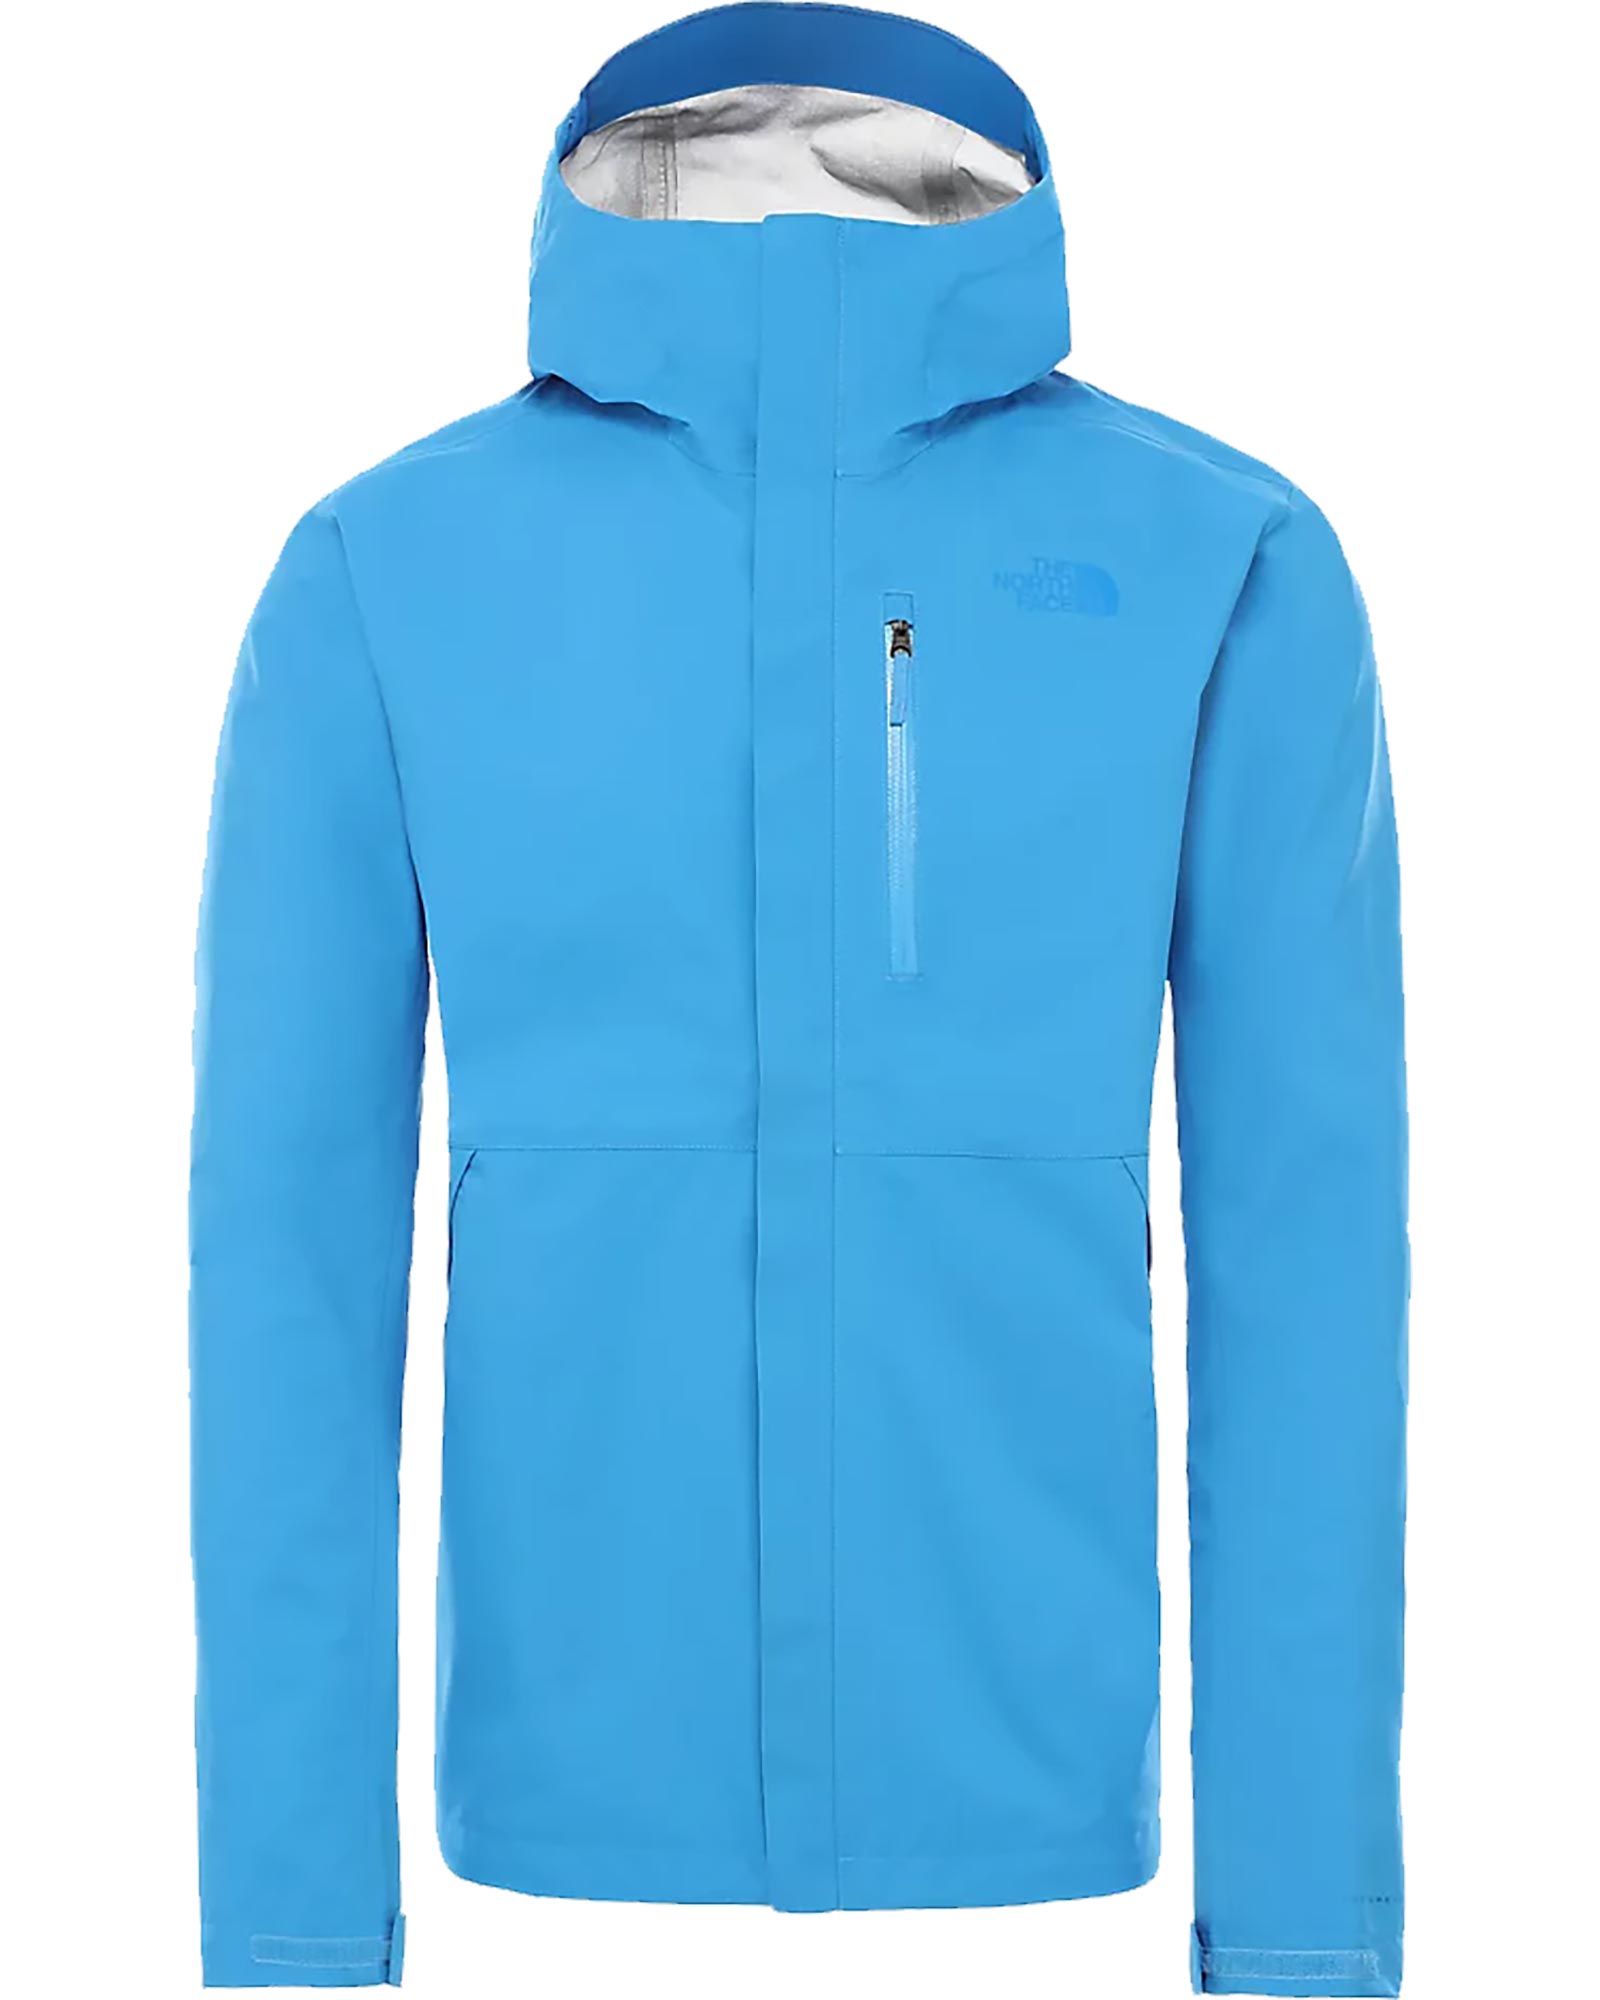 The North Face Dryzzle FUTURELIGHT Men’s Jacket - Clear Lake Blue S